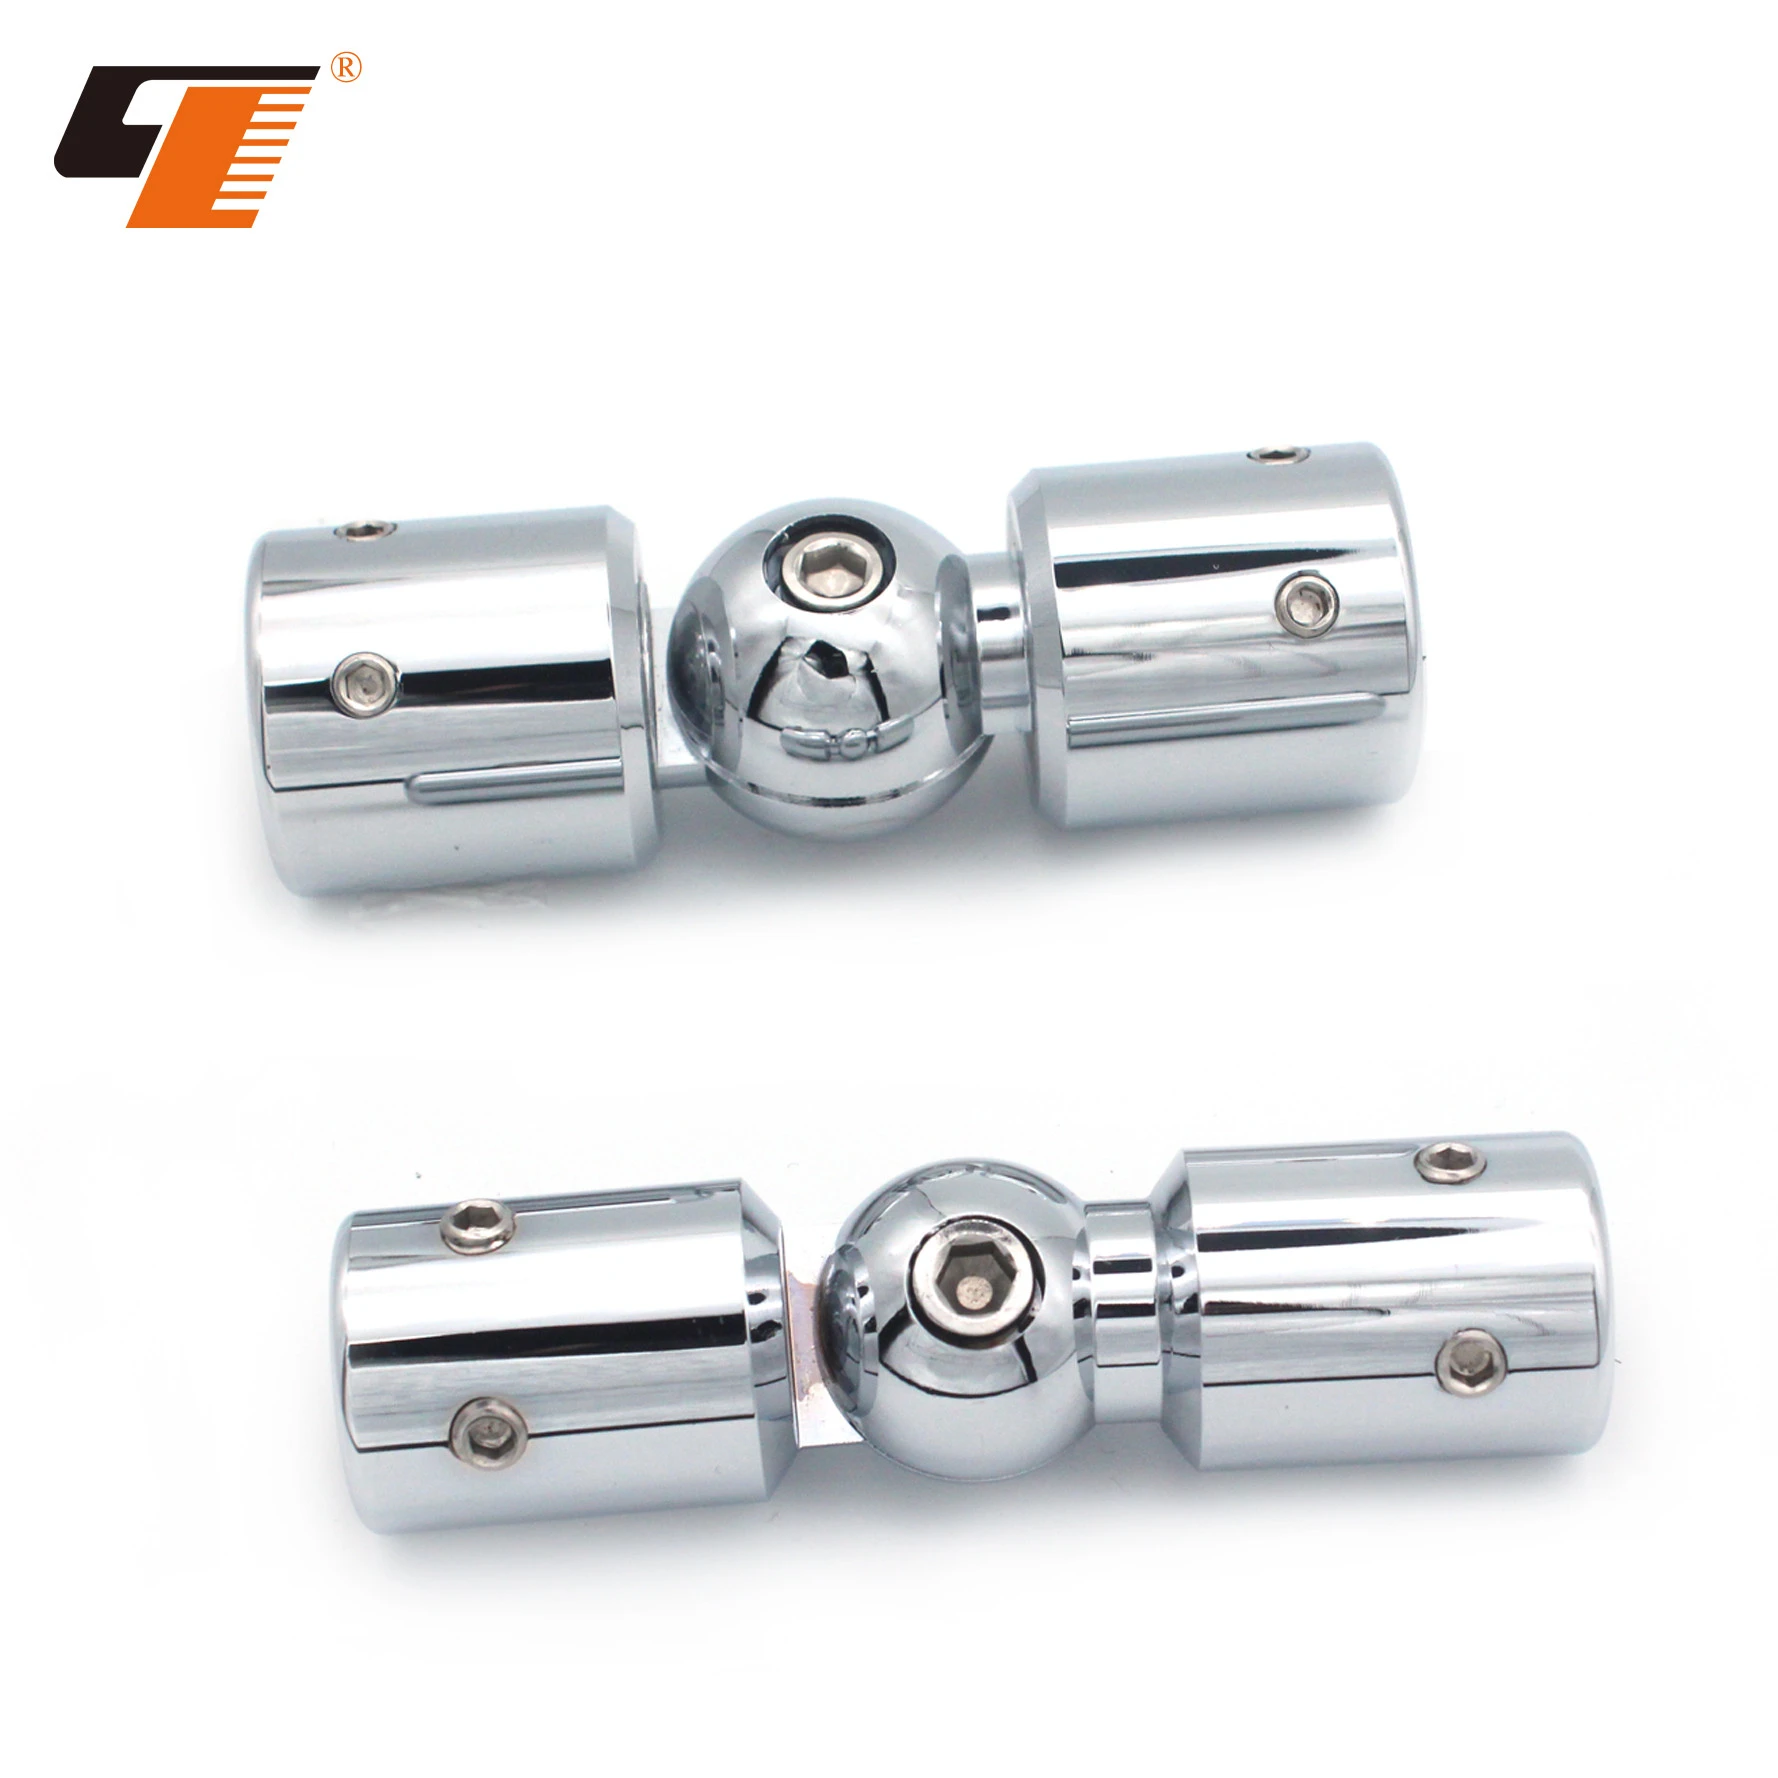 High Quality Zinc alloy Bathroom Fittings Pipe Flange Tube Connector Bracket Pipe Fitting Flexible Pipe Connectors